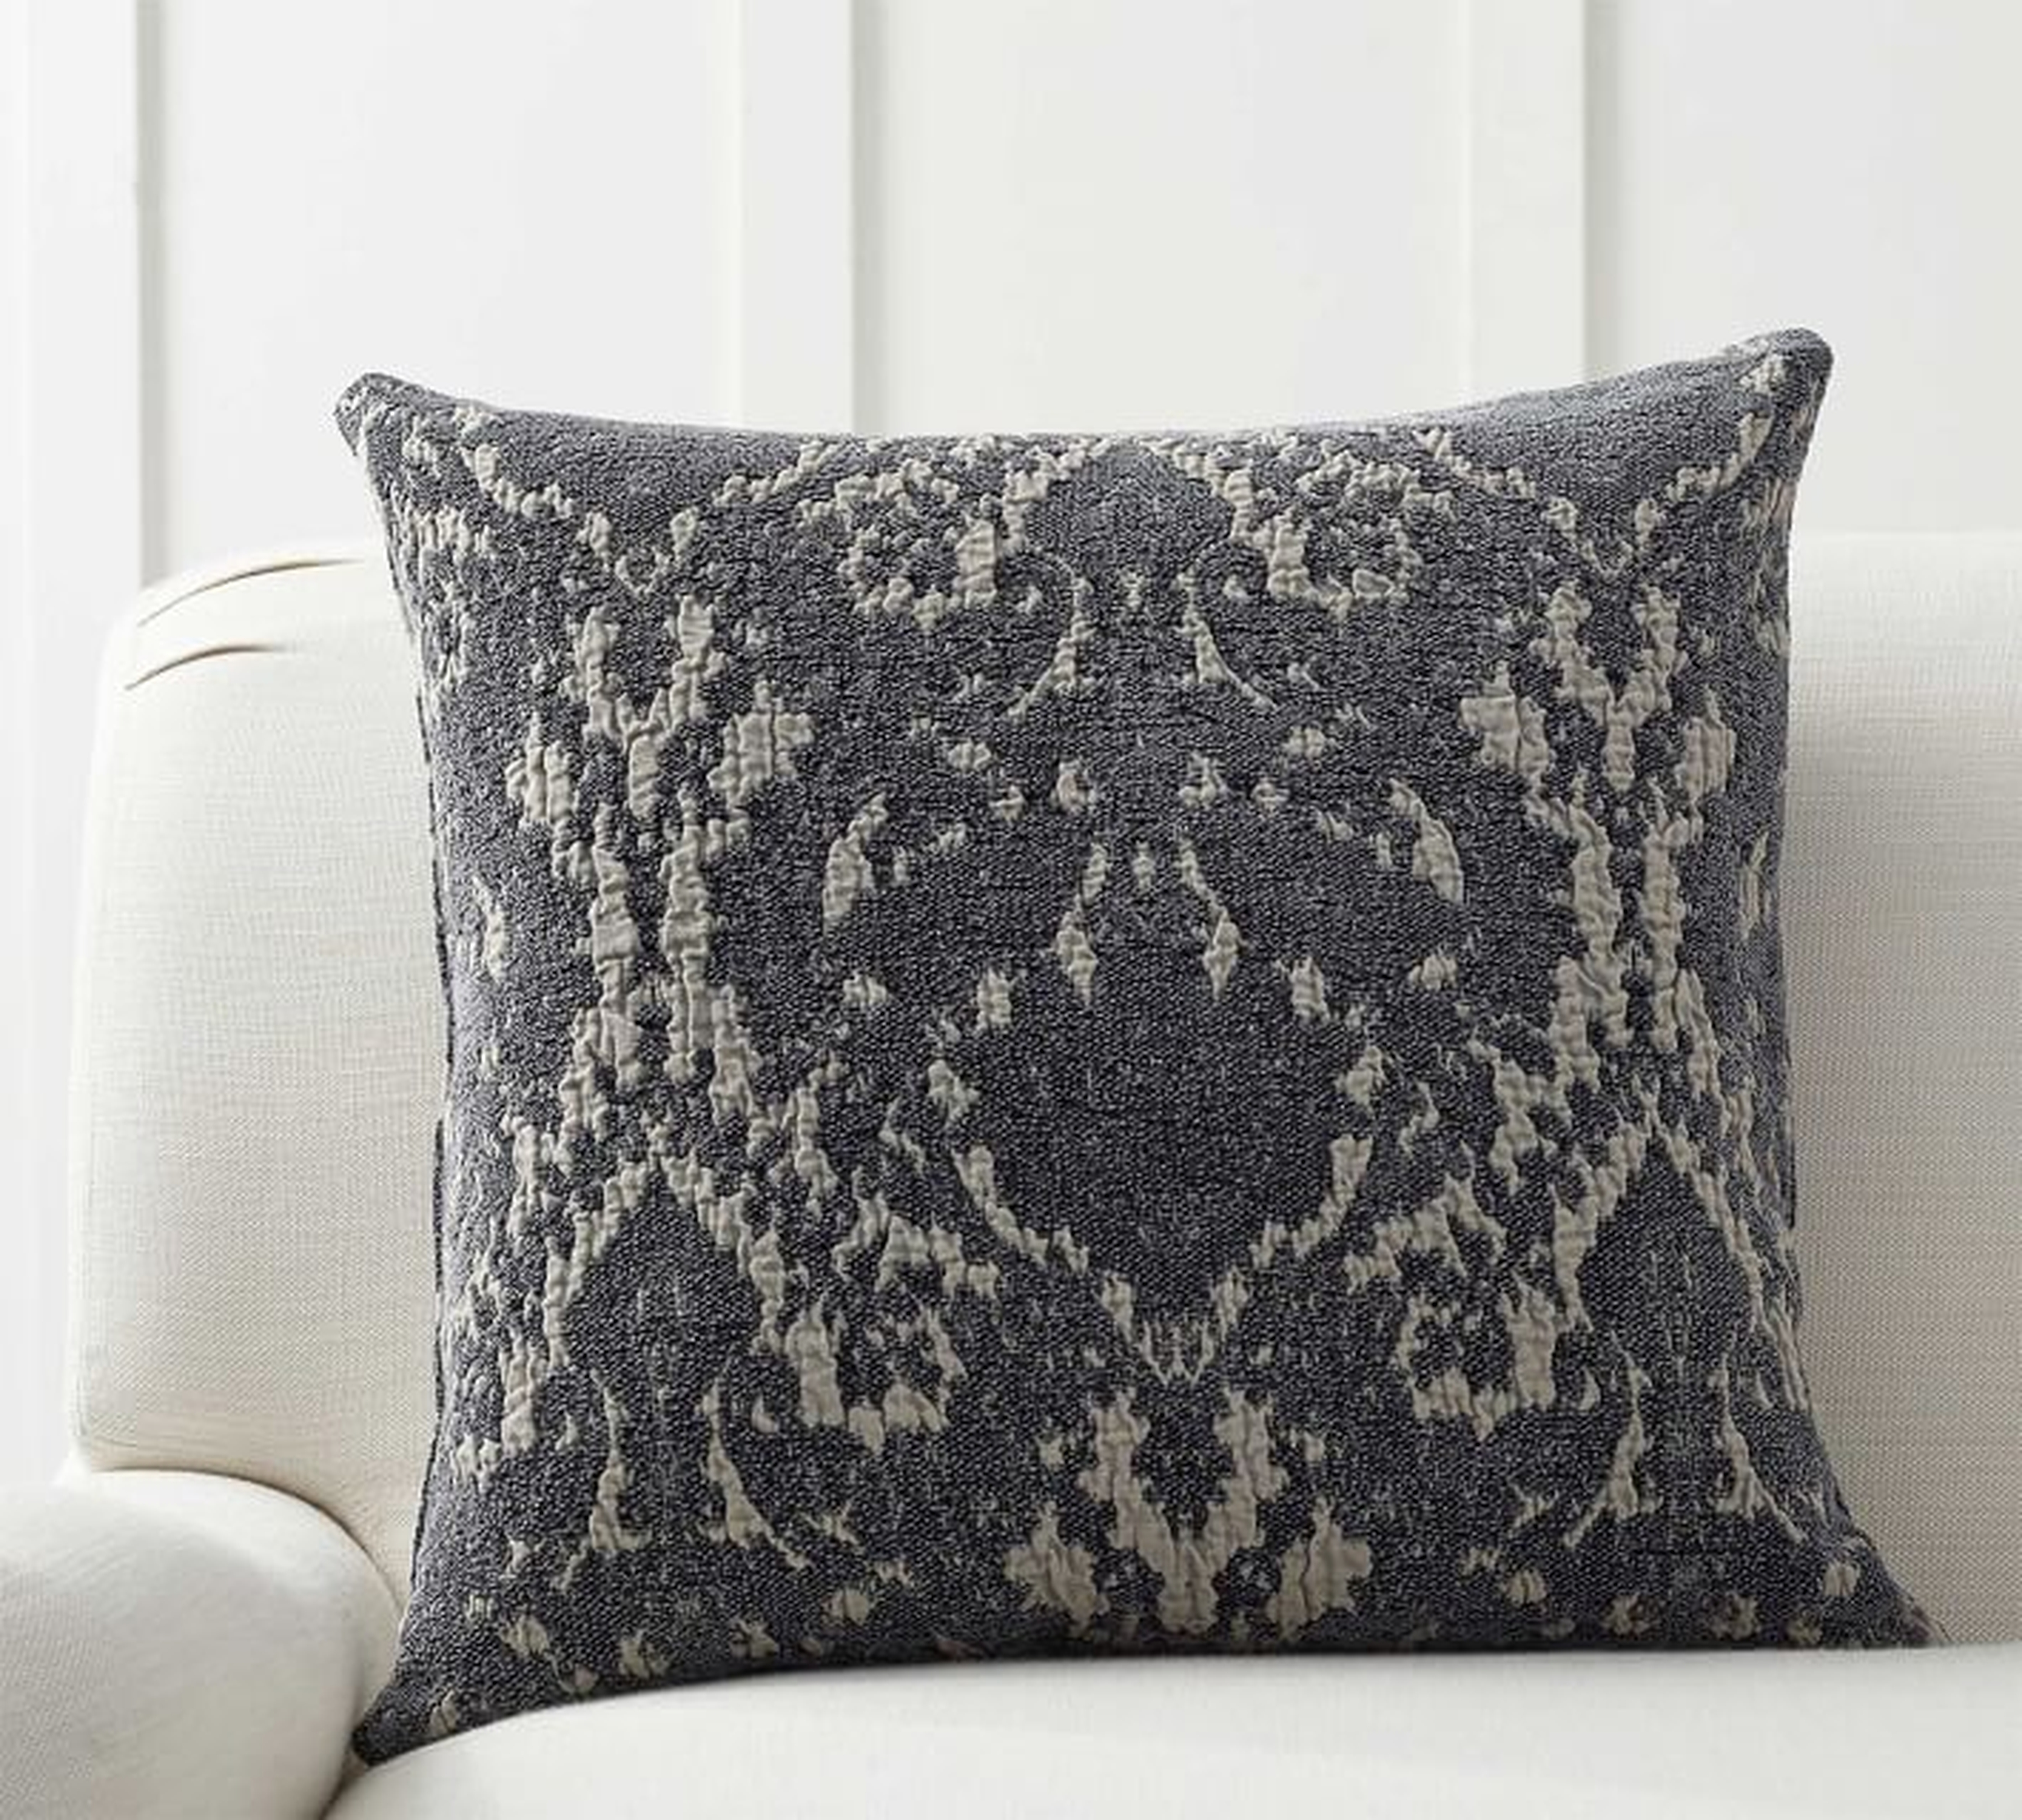 Devin Jacquard Pillow Cover, 22", Charcoal - Pottery Barn